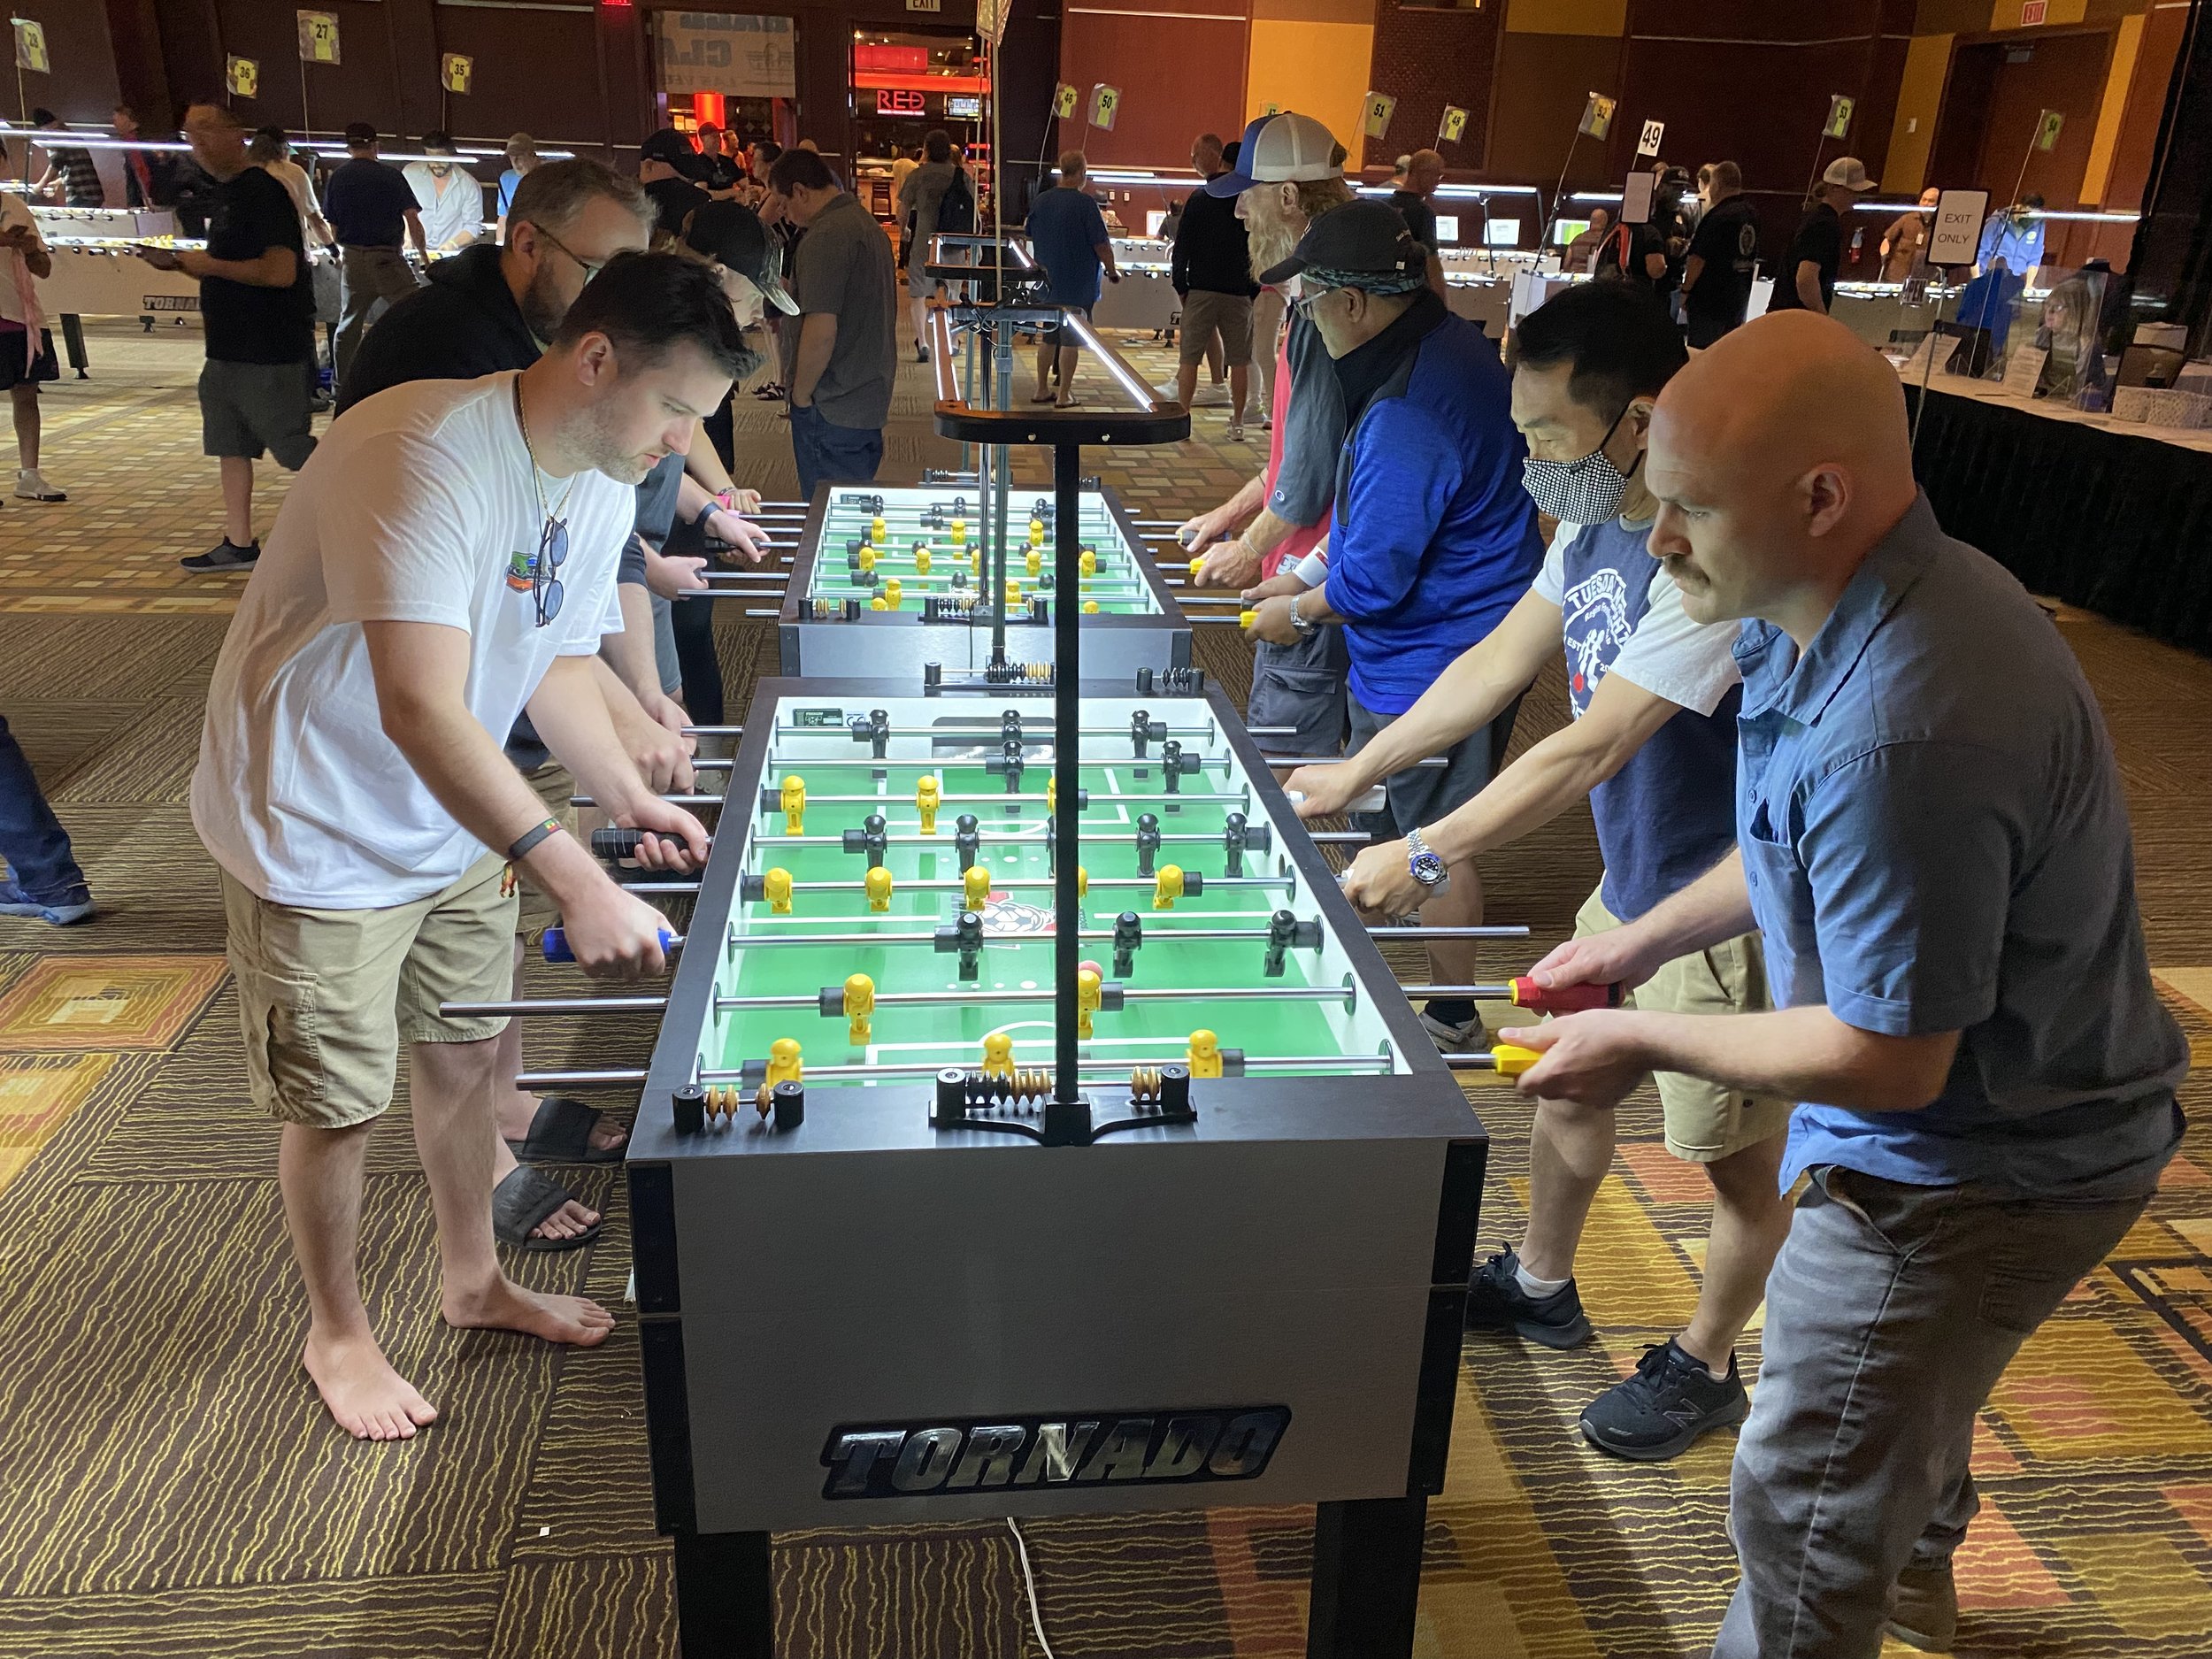 Canadian amateurs against Master players